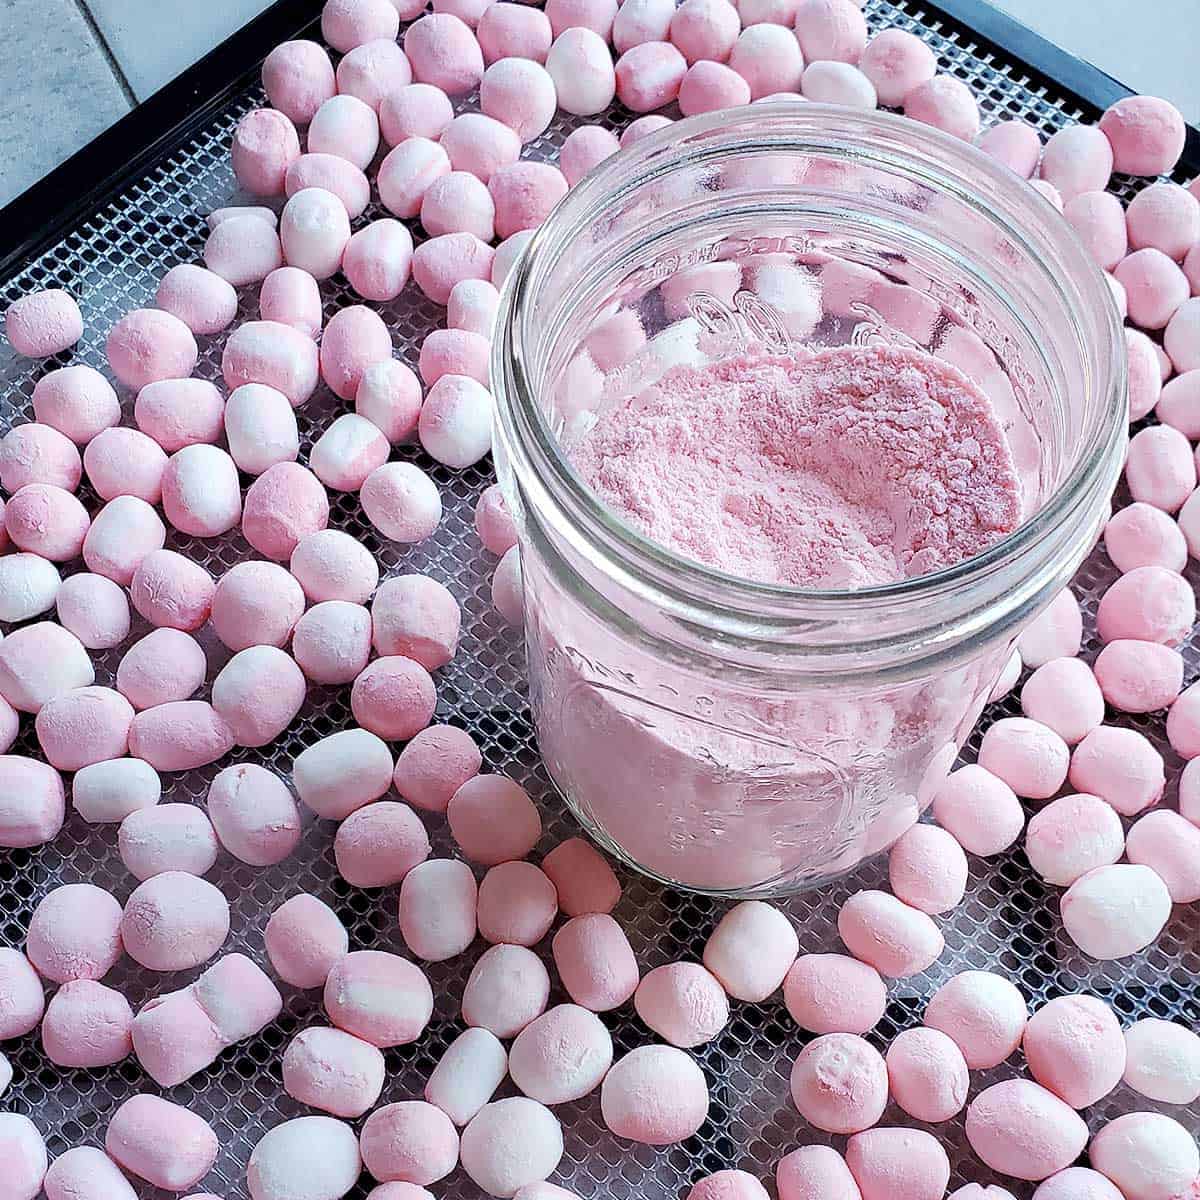 How to Dehydrate Marshmallows & Make Marshmallow Powder - The ...